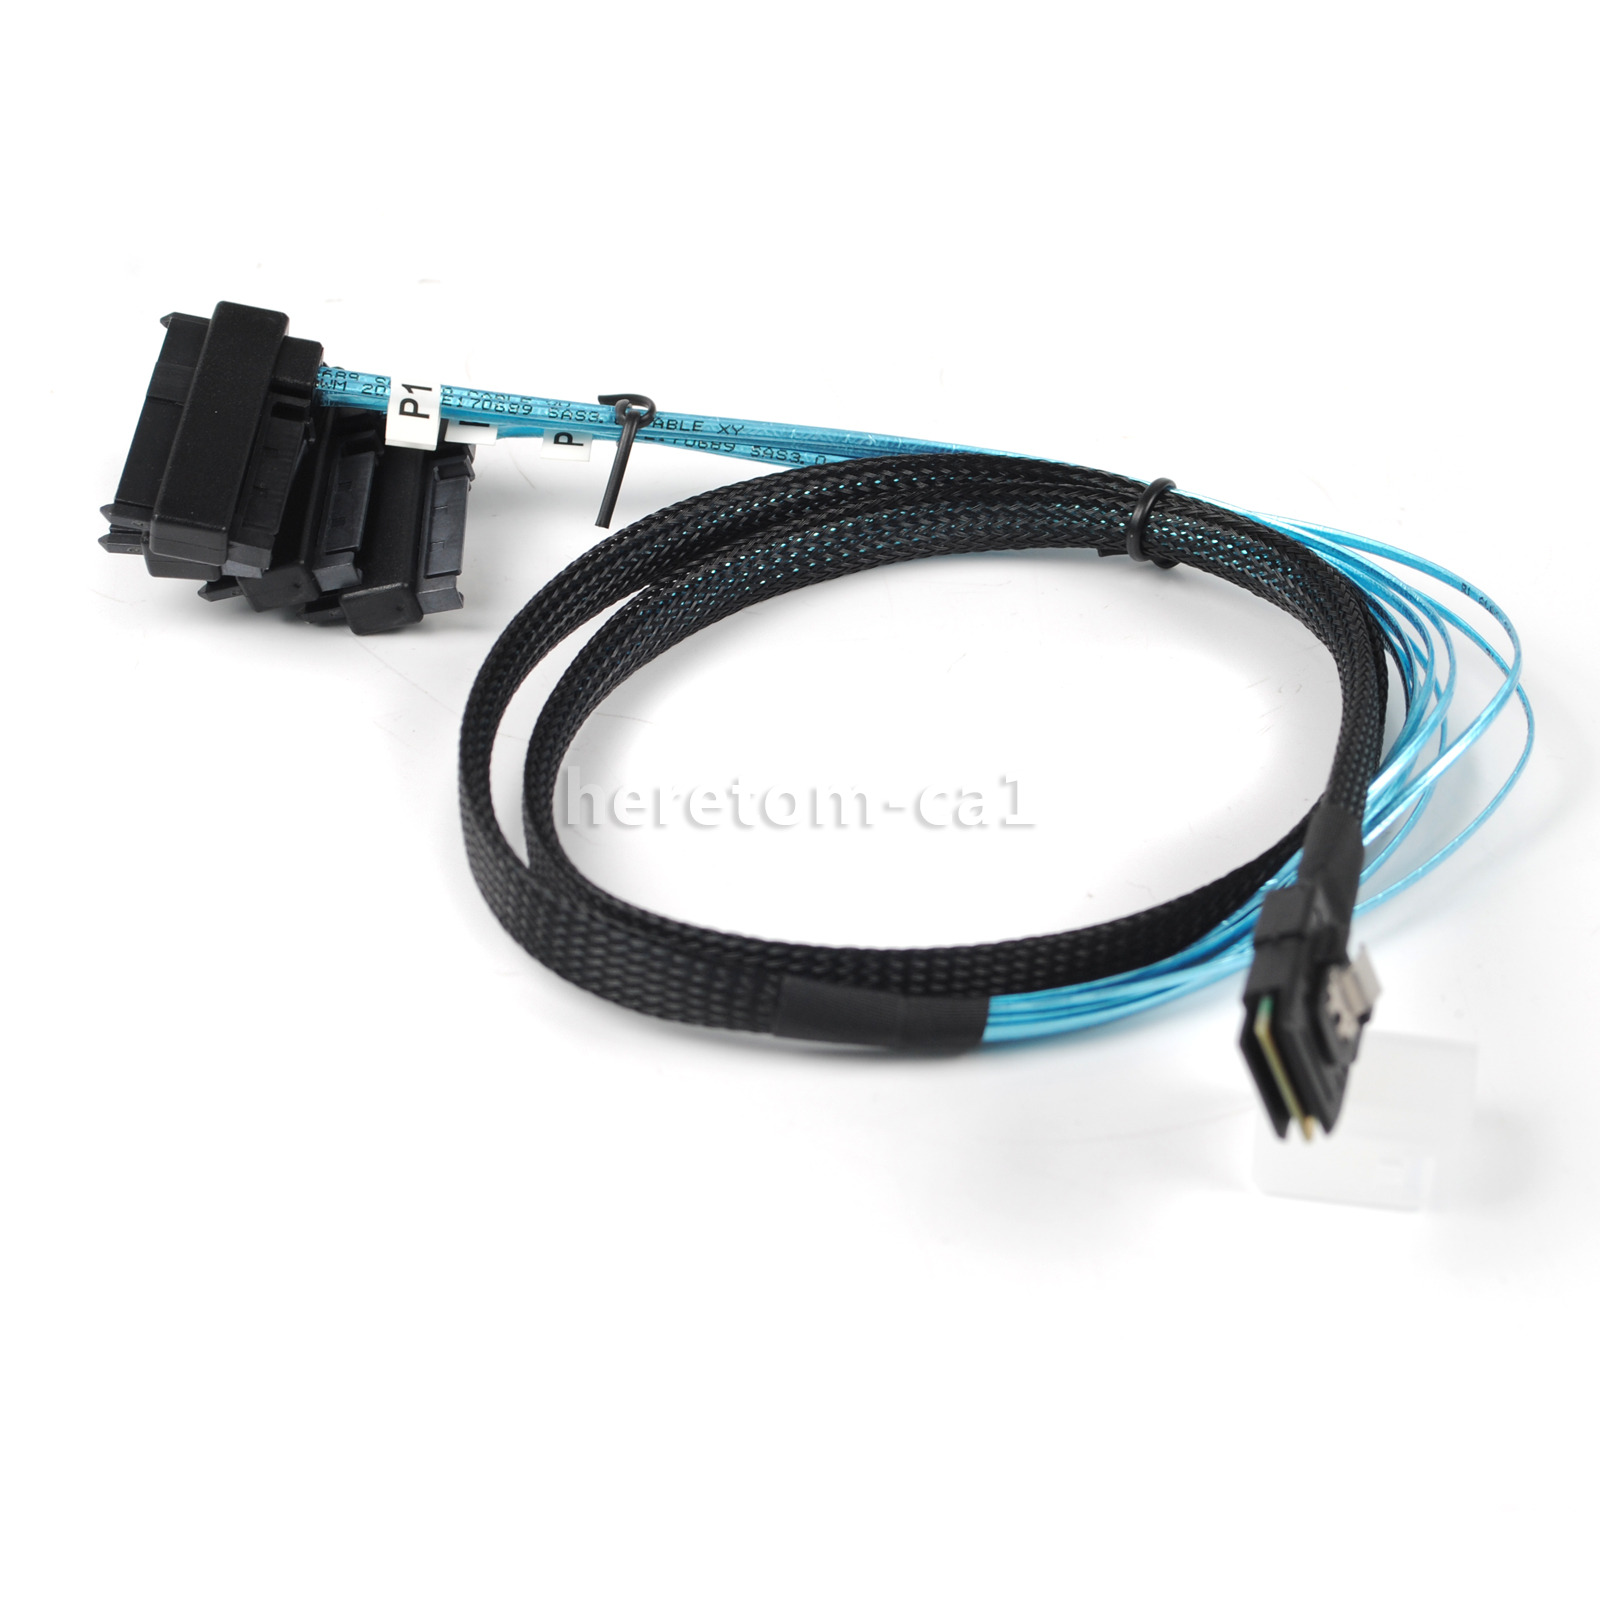 Mini SAS 36P SFF-8087 to 4 SFF-8482 Connectors With SATA Power Cable 3FT 1M